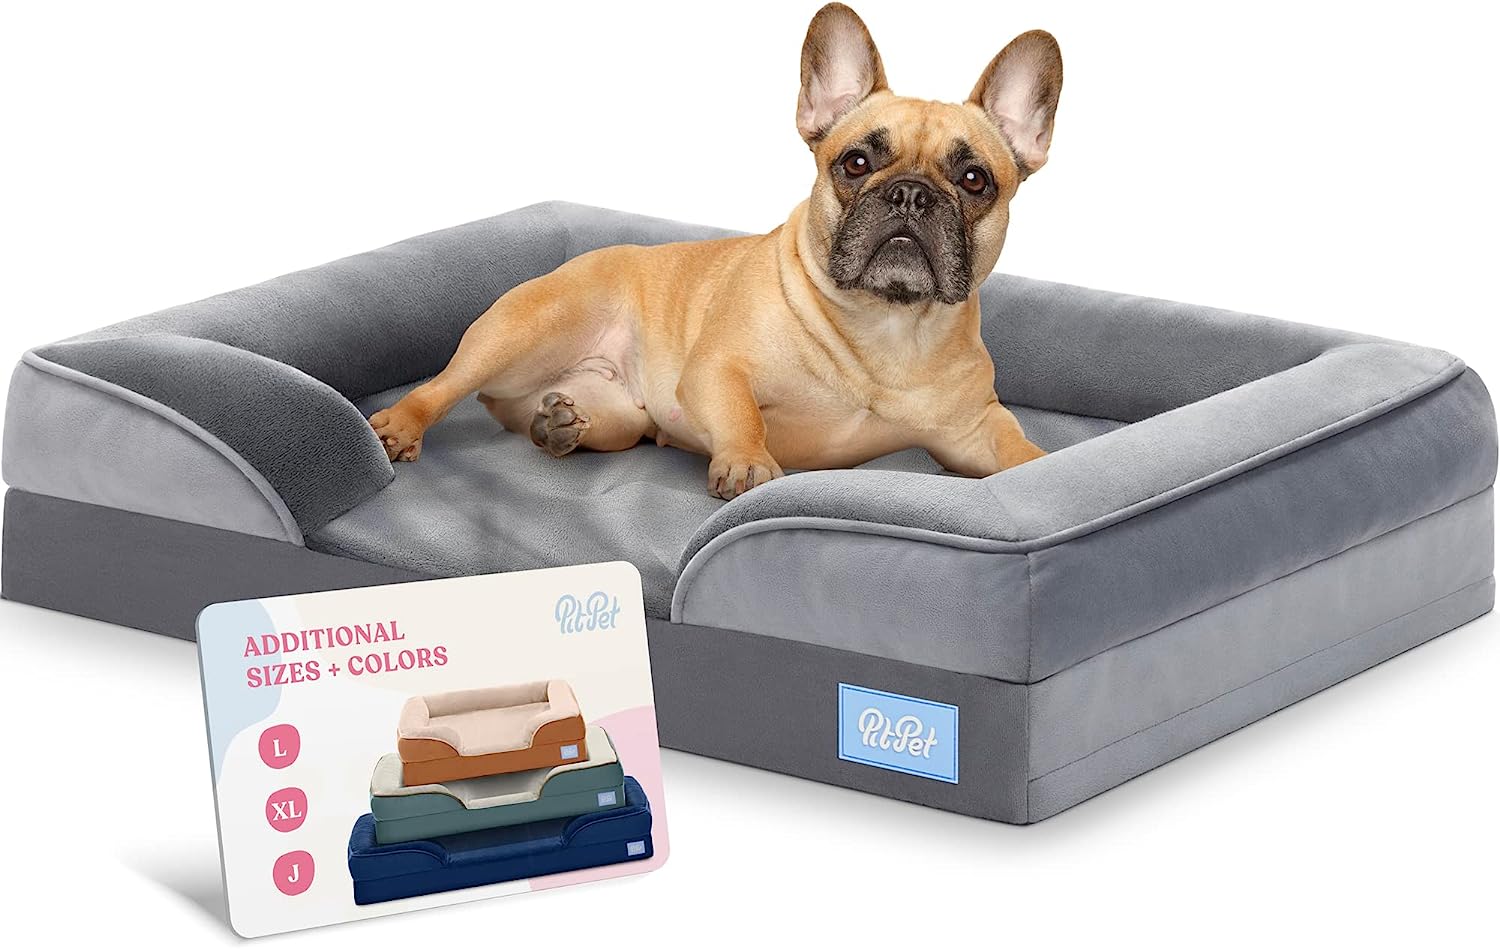 Orthopedic Sofa Dog Bed – Ultra Comfortable Dog Beds for Medium Dogs Review